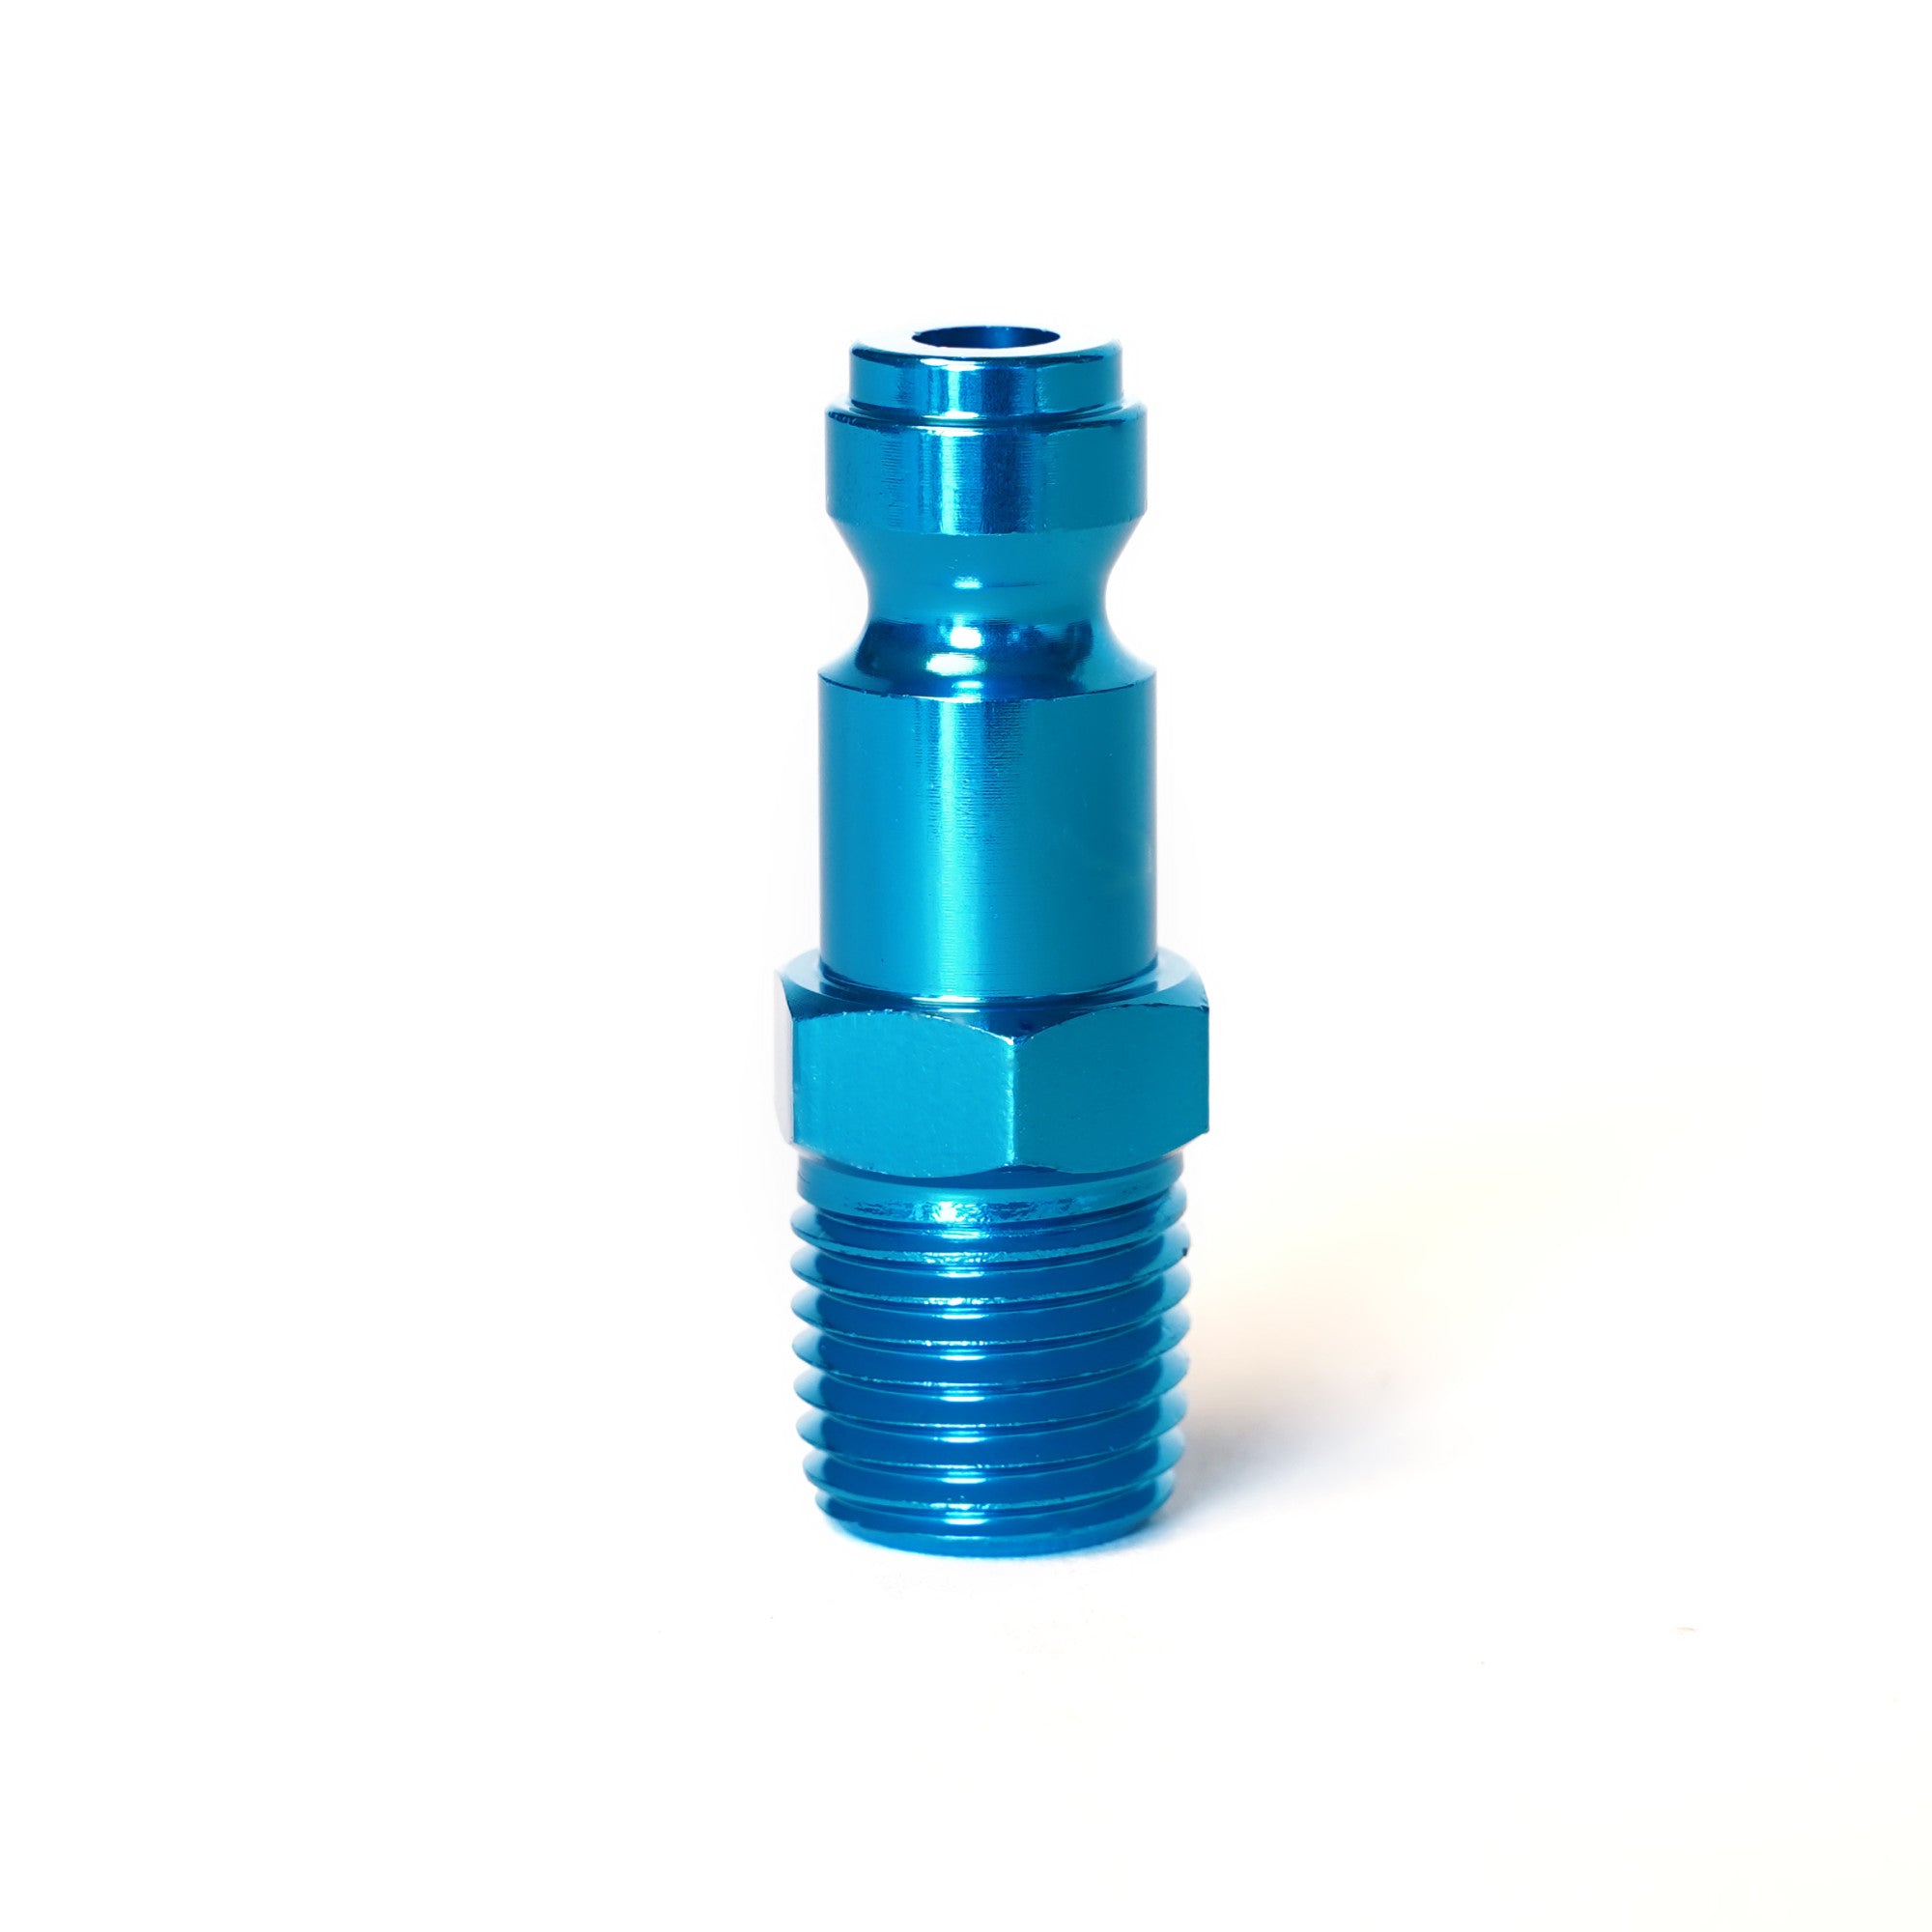 Steelman 1/4-In Quick Disconnect Plug, 1/4-In Male Npt Threads